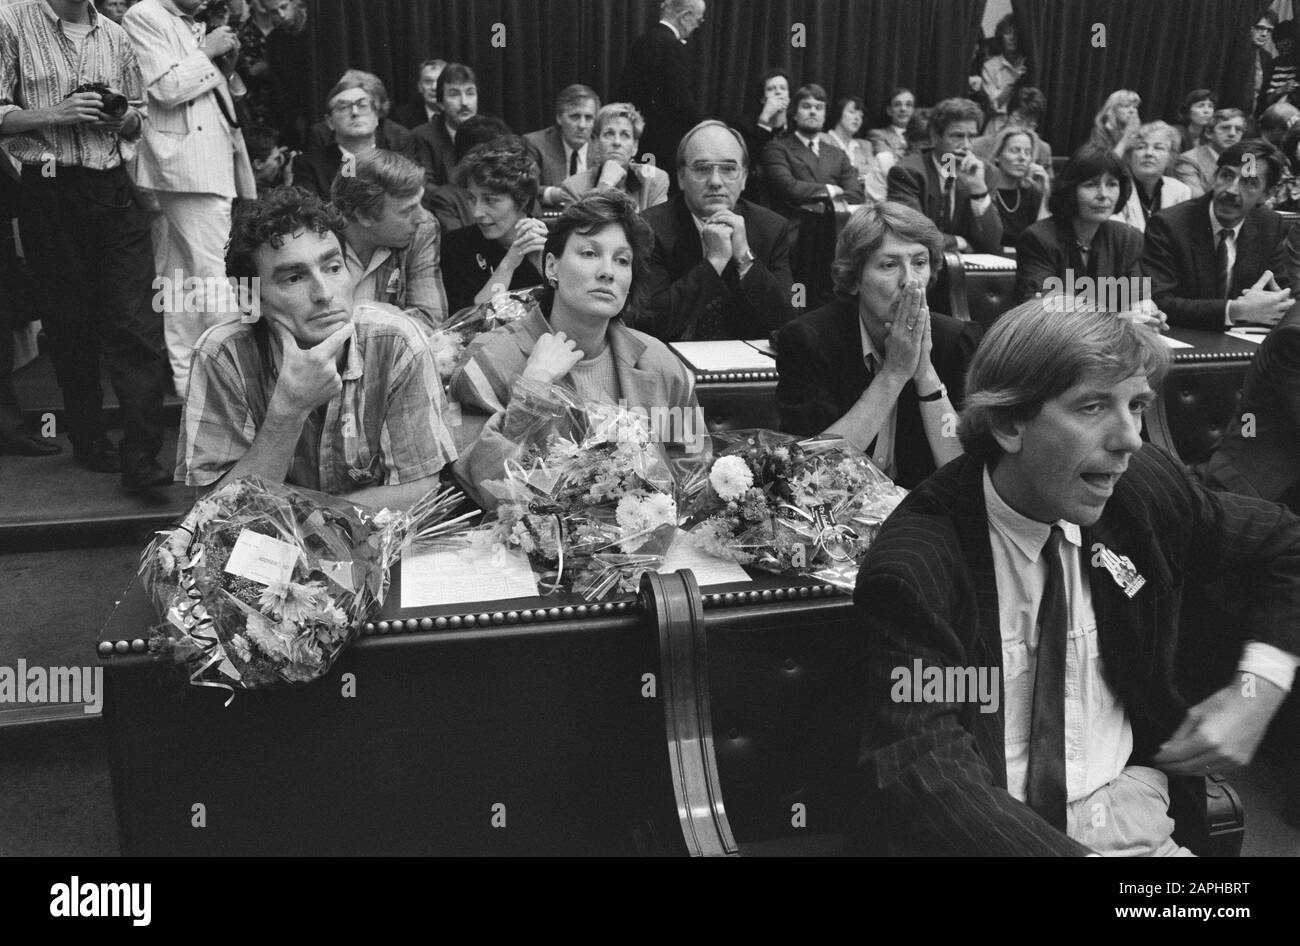 Installation MPs after the elections Description: The fraction of GreenLeft Annotation: Andree van Es, Ria Bekkers (with flowers). Vooraan Peter Lankhorst Date: 14 september 1989 Location: Den Haag, Zuid-Holland Keywords: installations, MPs, political Stock Photo